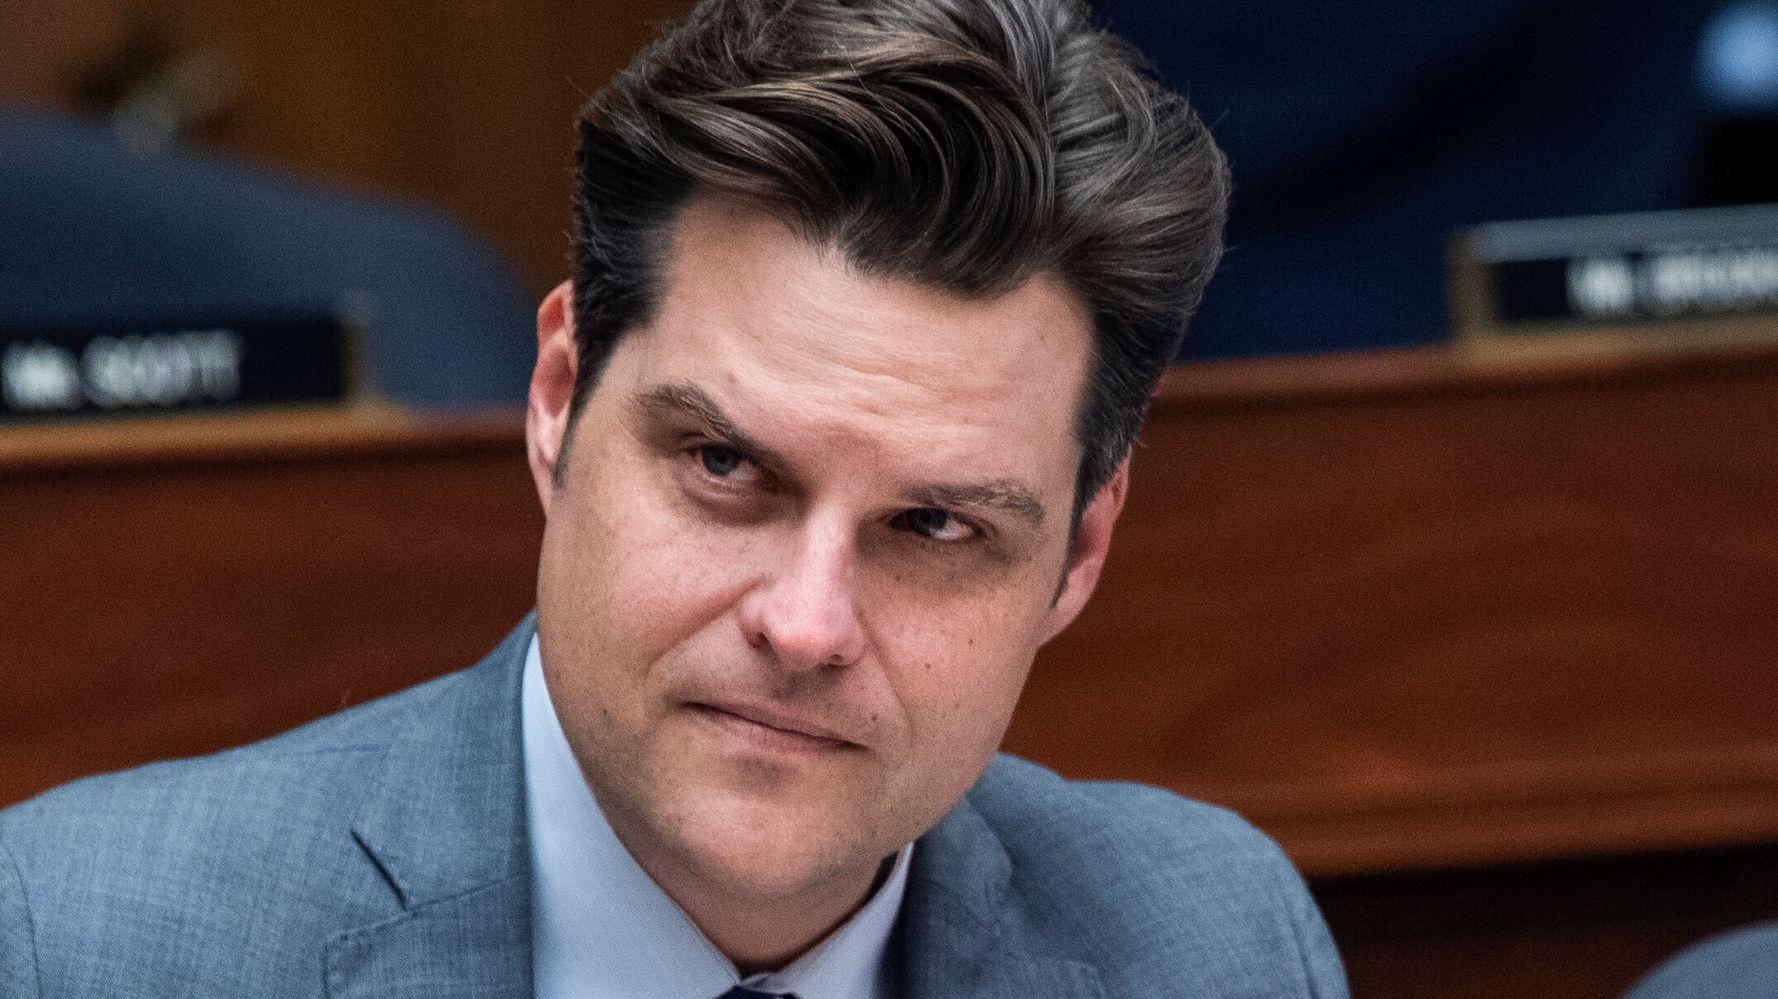 “McCarthy will cut and edge my lawn, and trim the bushes,” demands Gaetz